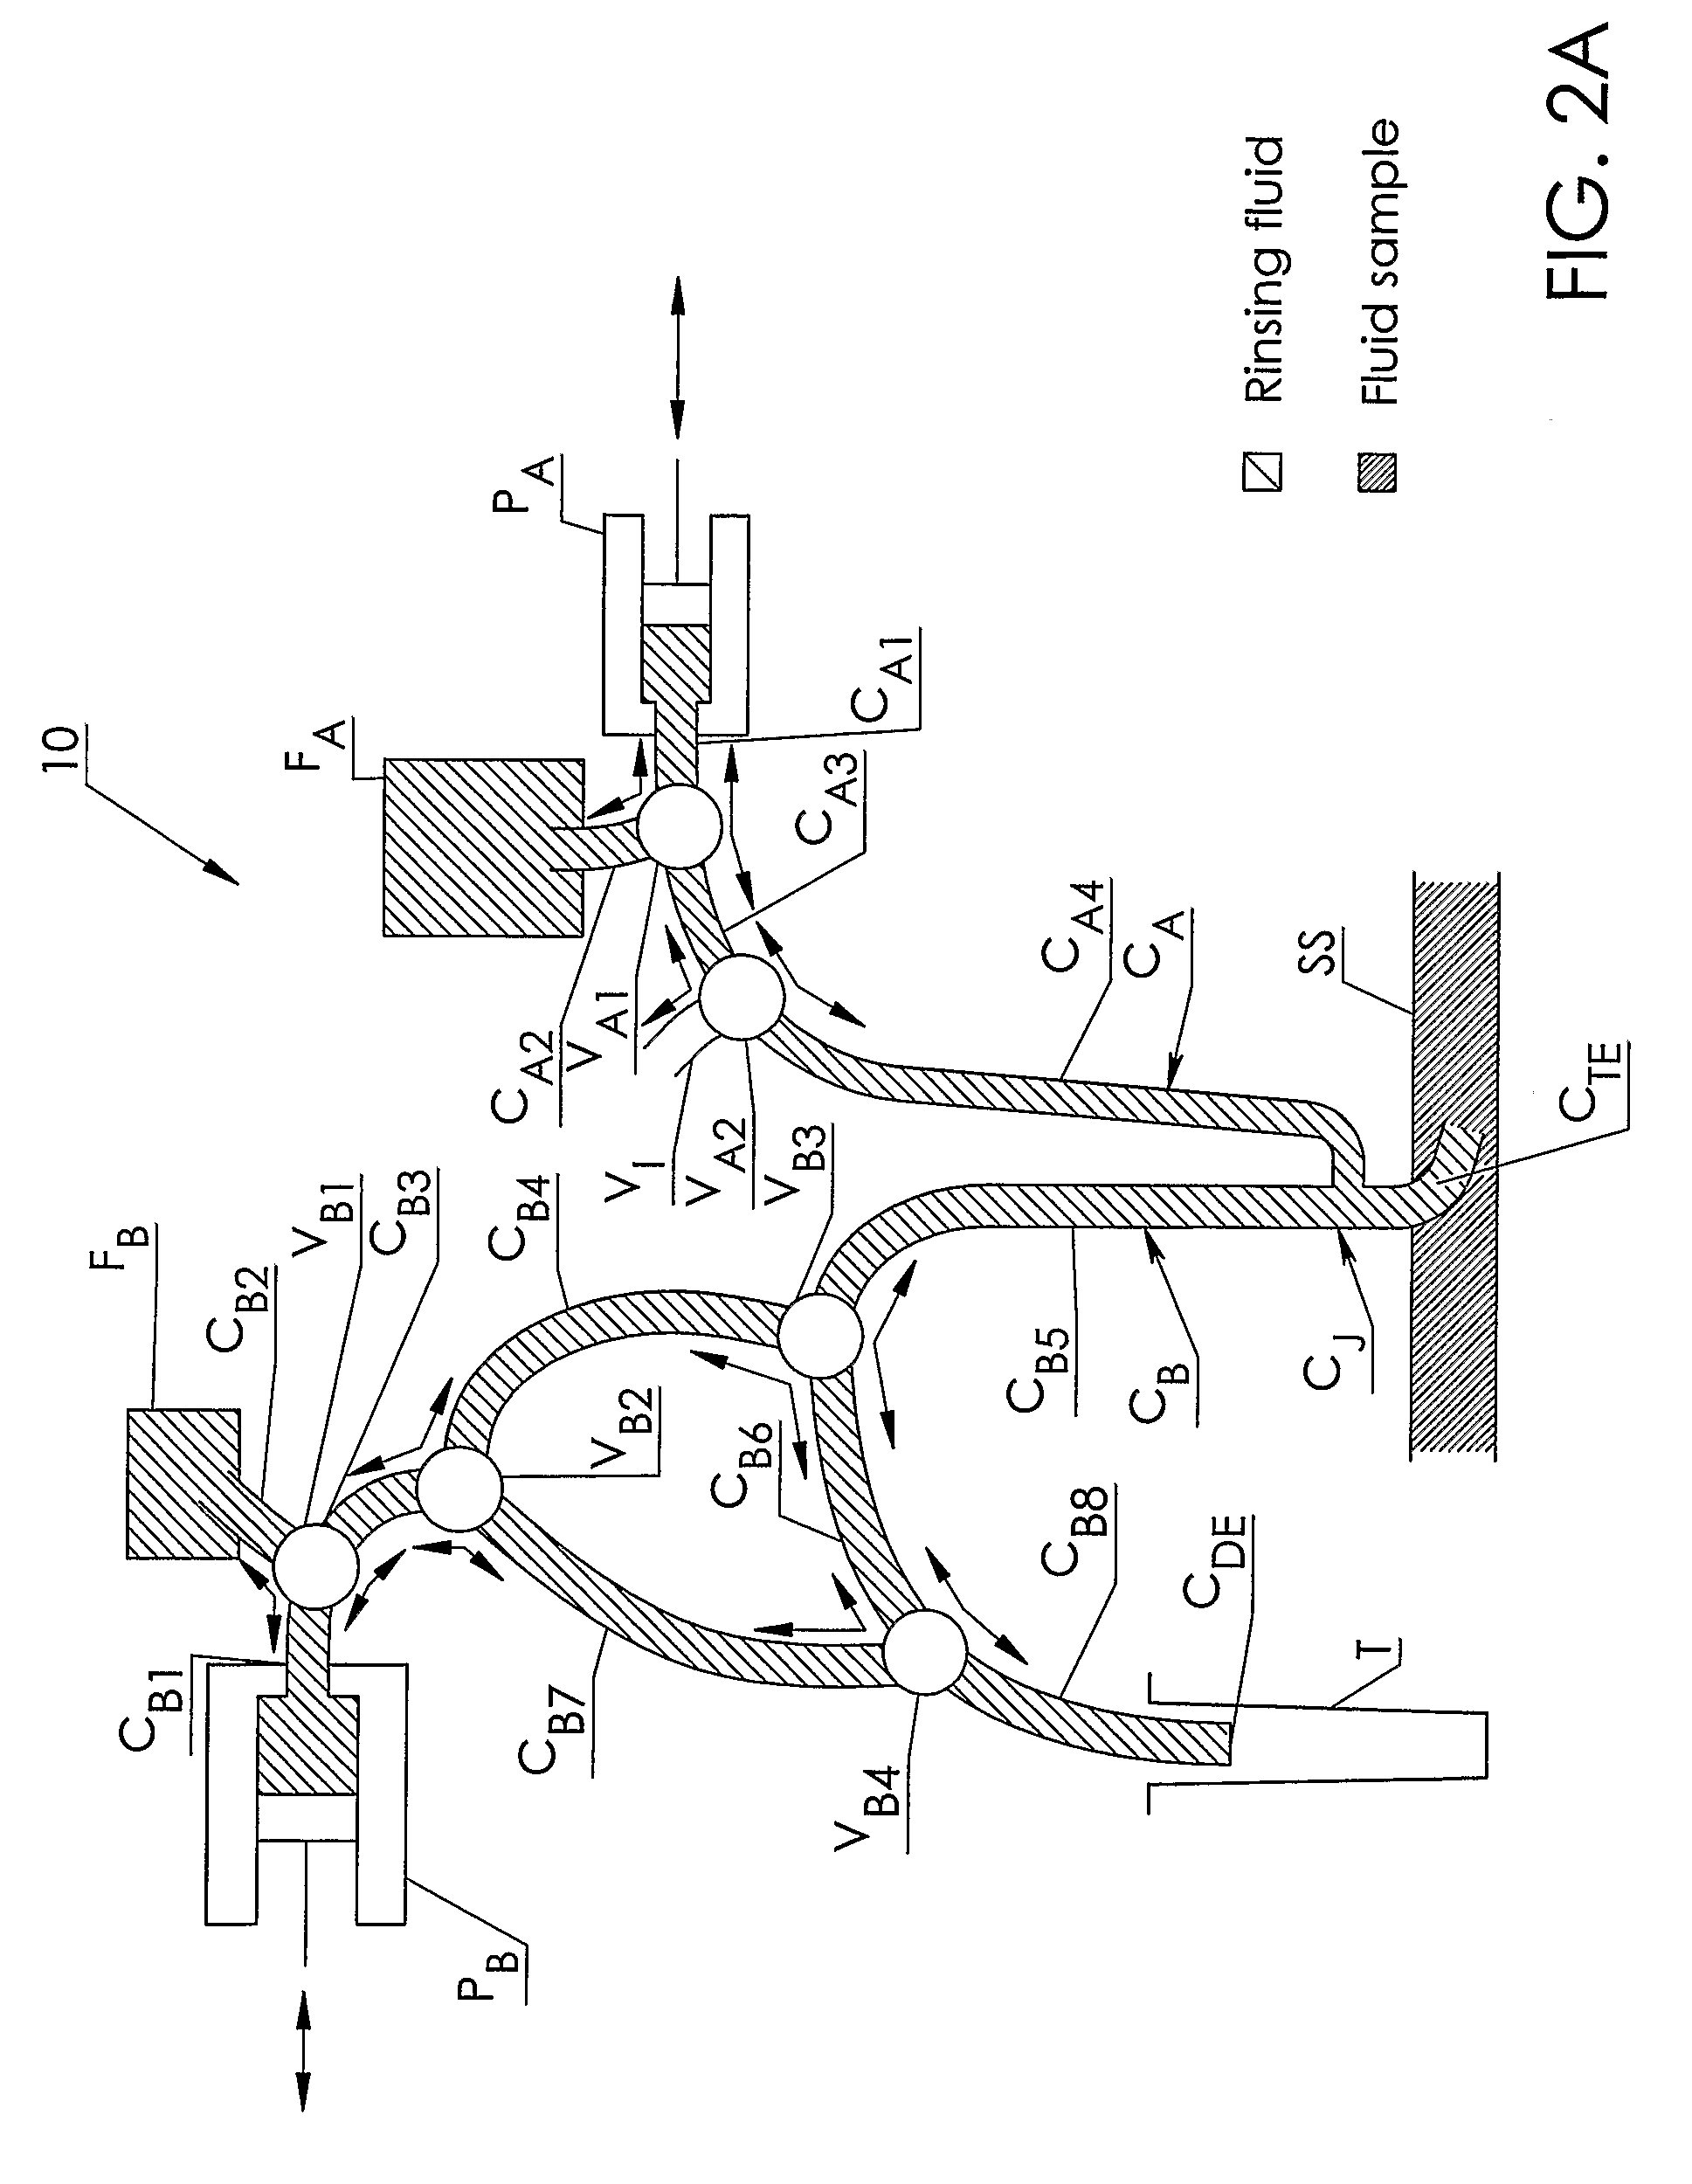 System and method for automatic taking of fluid samples